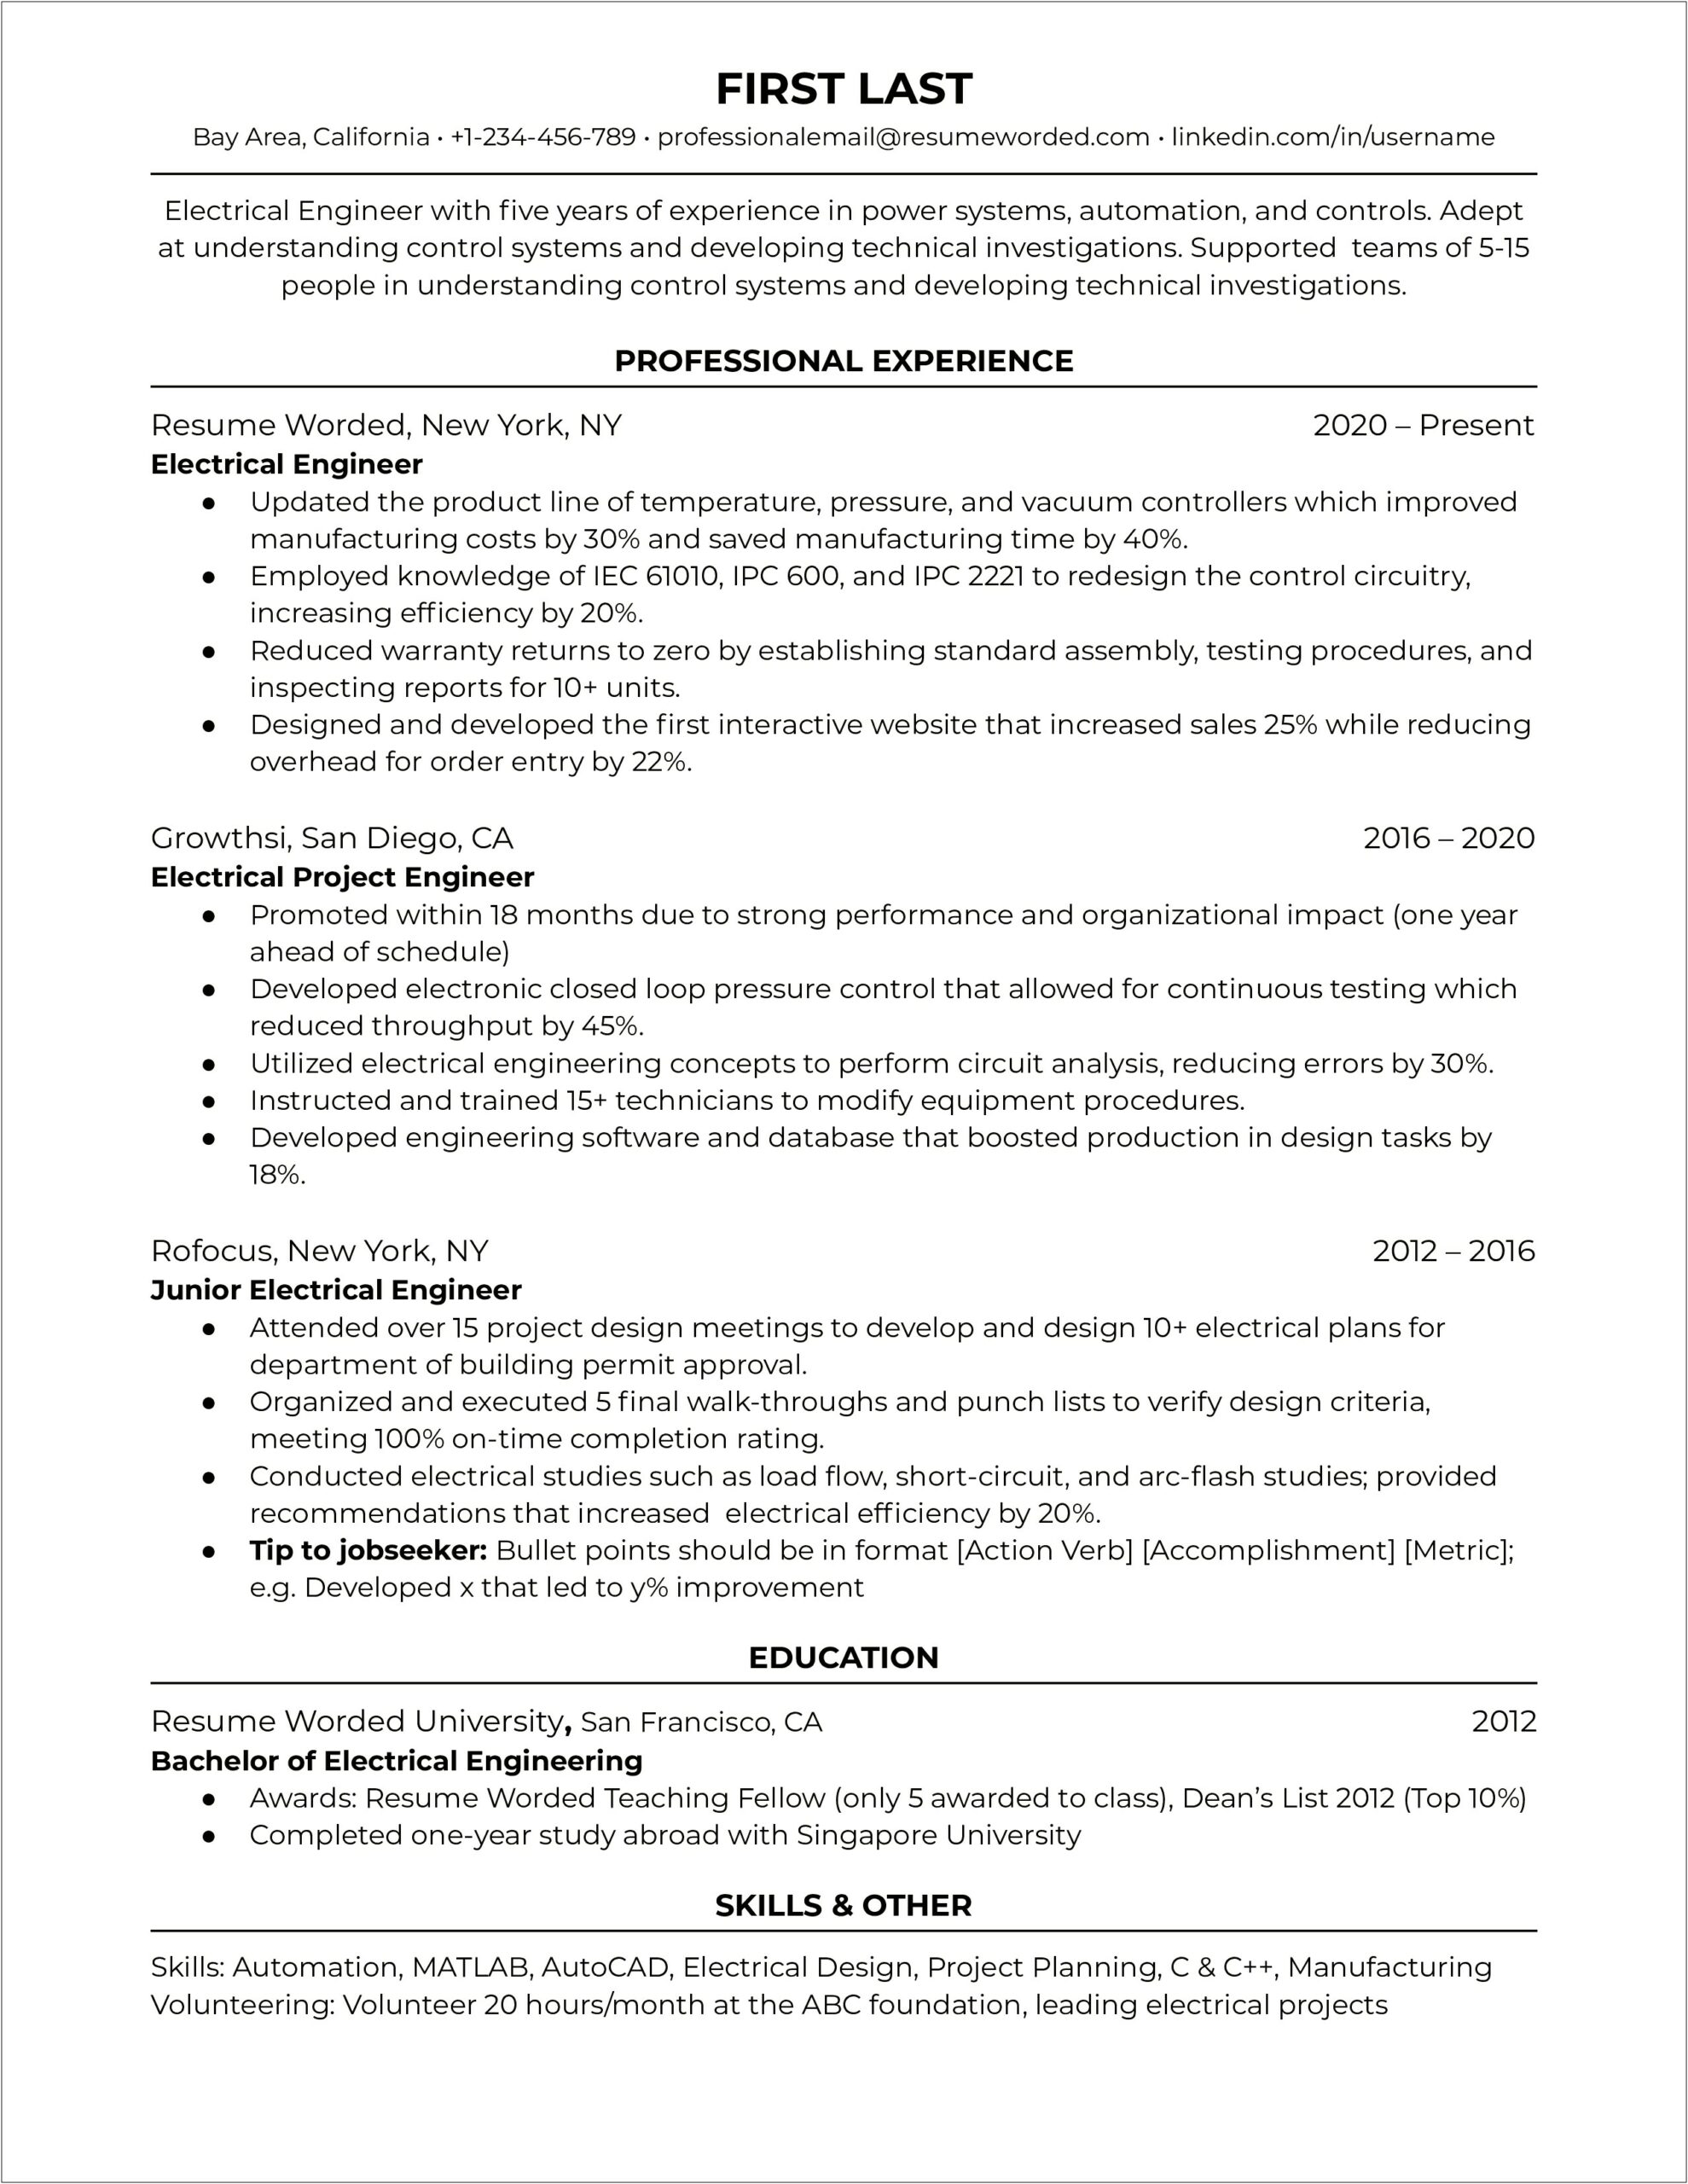 Download Resume Templates For Engineer